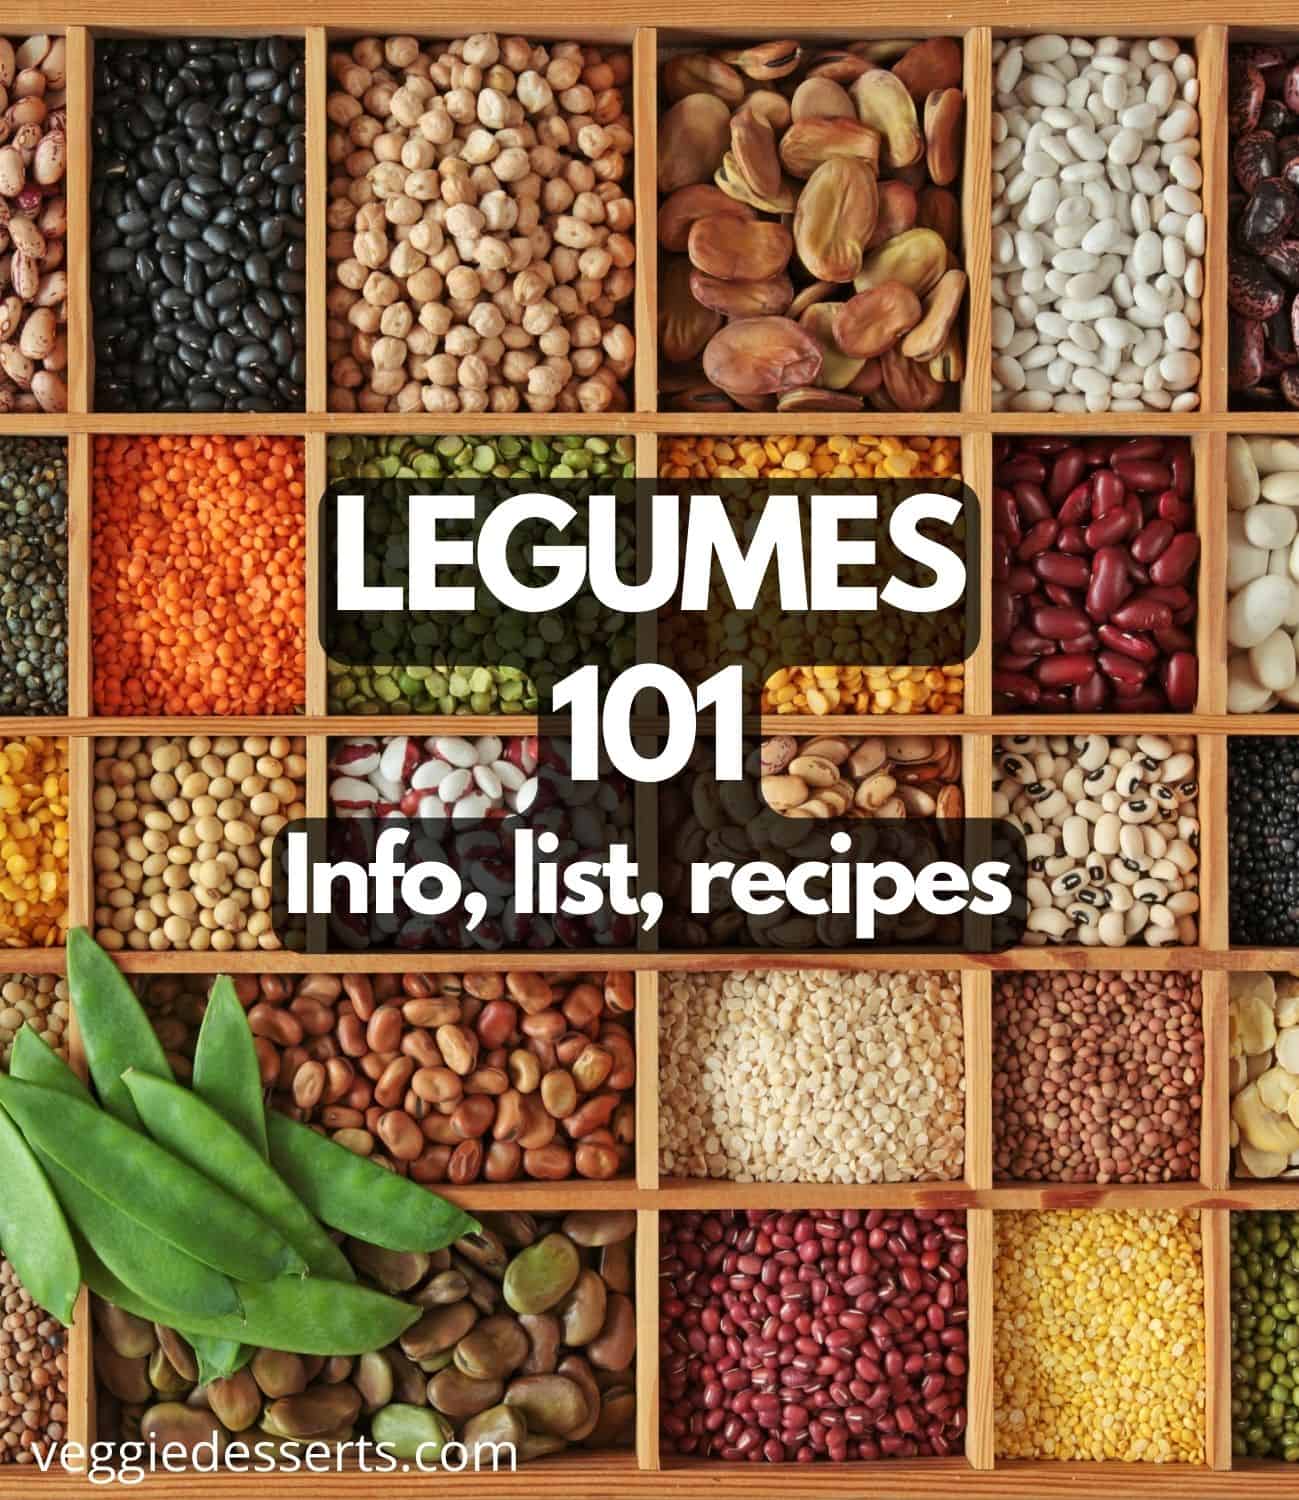 All About Legumes - List, Guide, Info